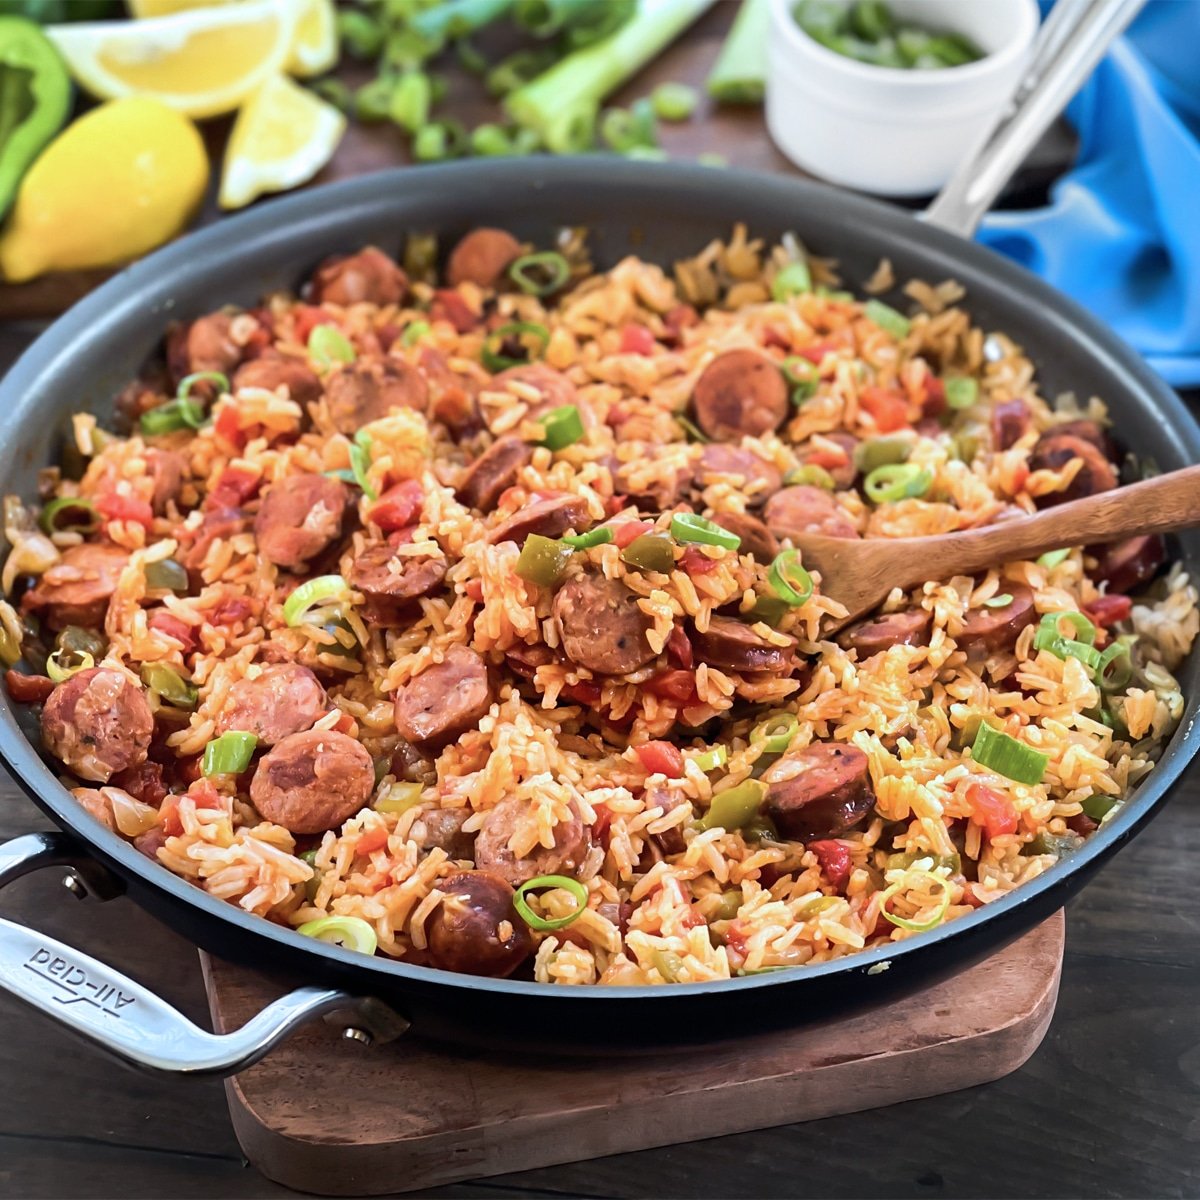 Sausage and Rice Skillet meal with tomato, bell pepper, and green onion.